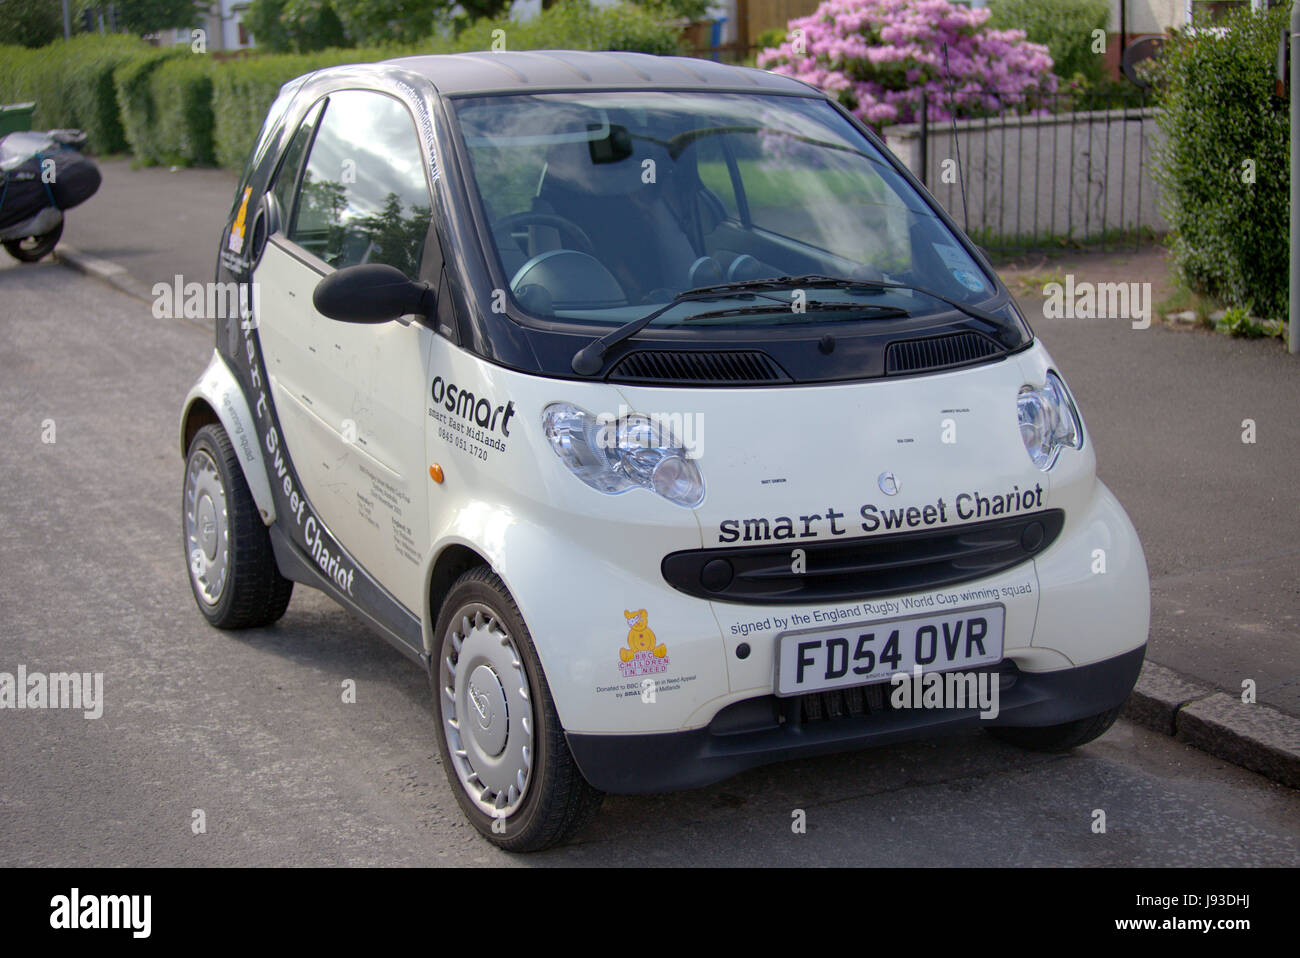 smart sweet chariot smart car from children in need with the England cricket team signatures Stock Photo